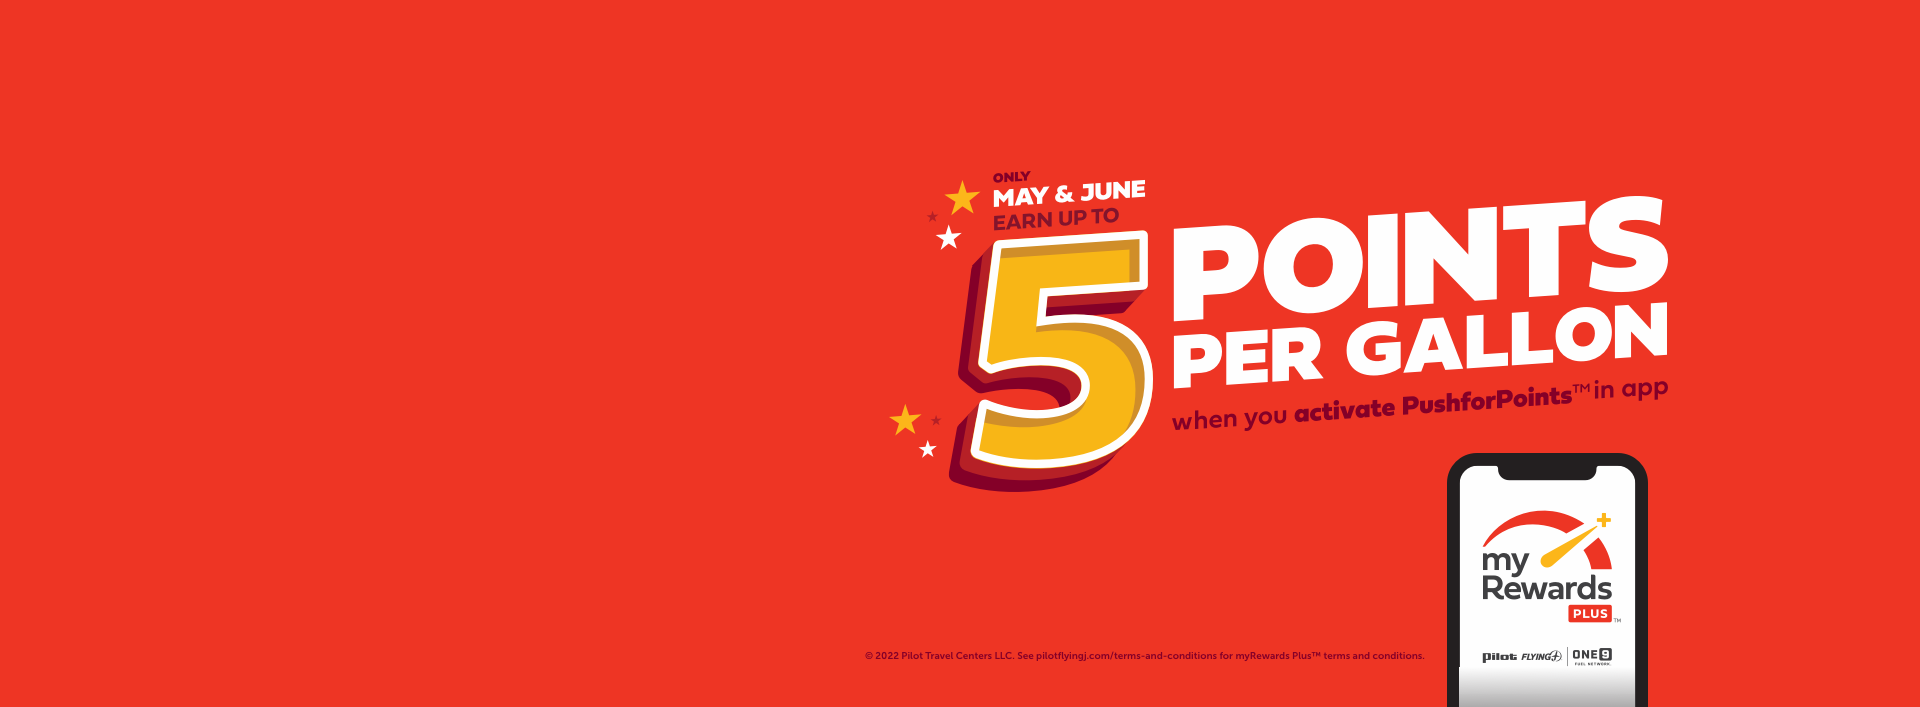 Earn up to 5 points per gallon - activate PushforPoints in May and June